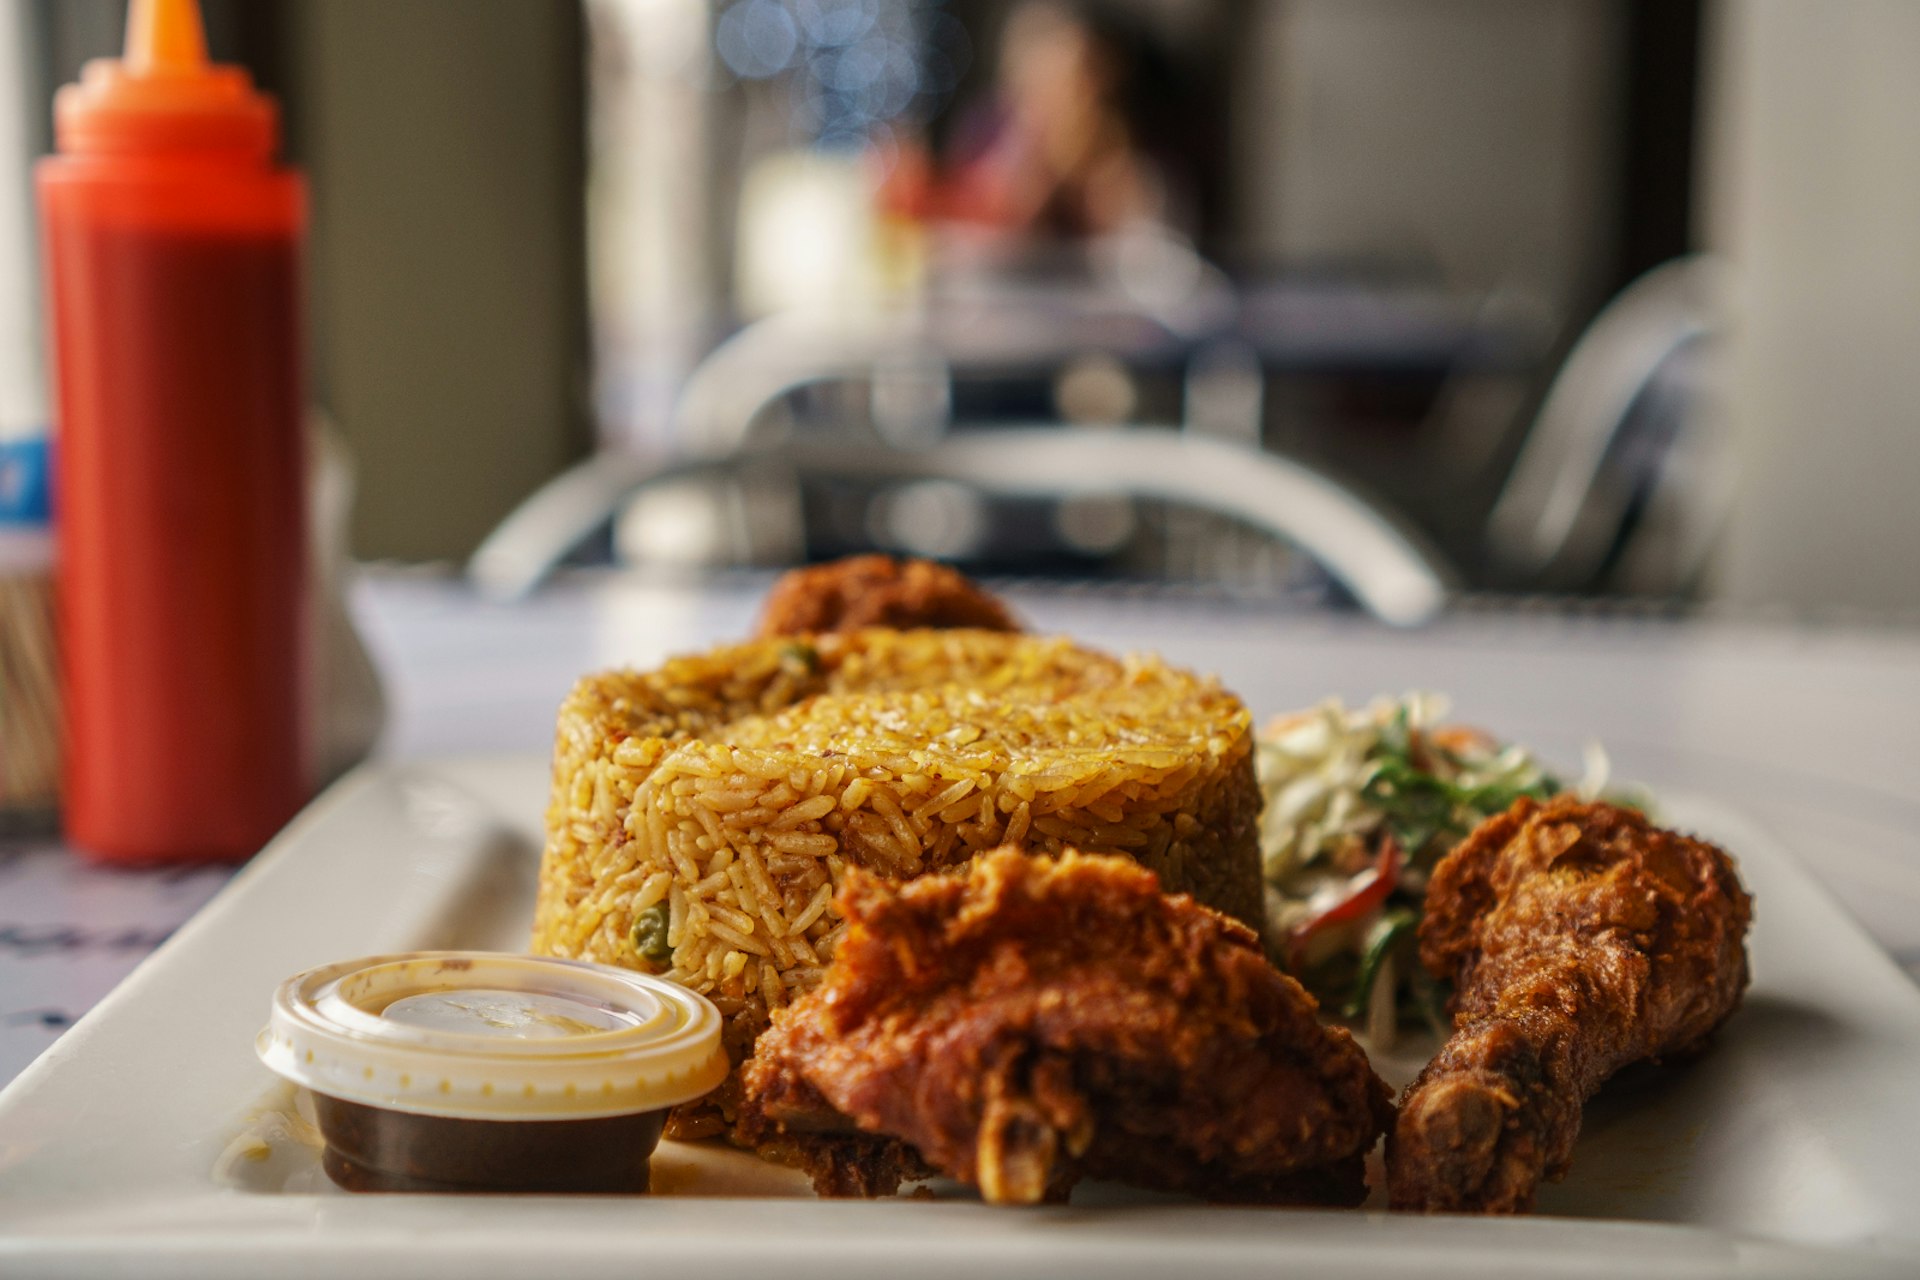  Flanked by a bottle of tomato ketchup, a square plate is laden with a neat cylindrical pile of yellow Jollof rice, two fried chicken legs, a salad and small plastic container of chilli sauce. Taken at Frankie's © Elio Stamm / Lonely Planet